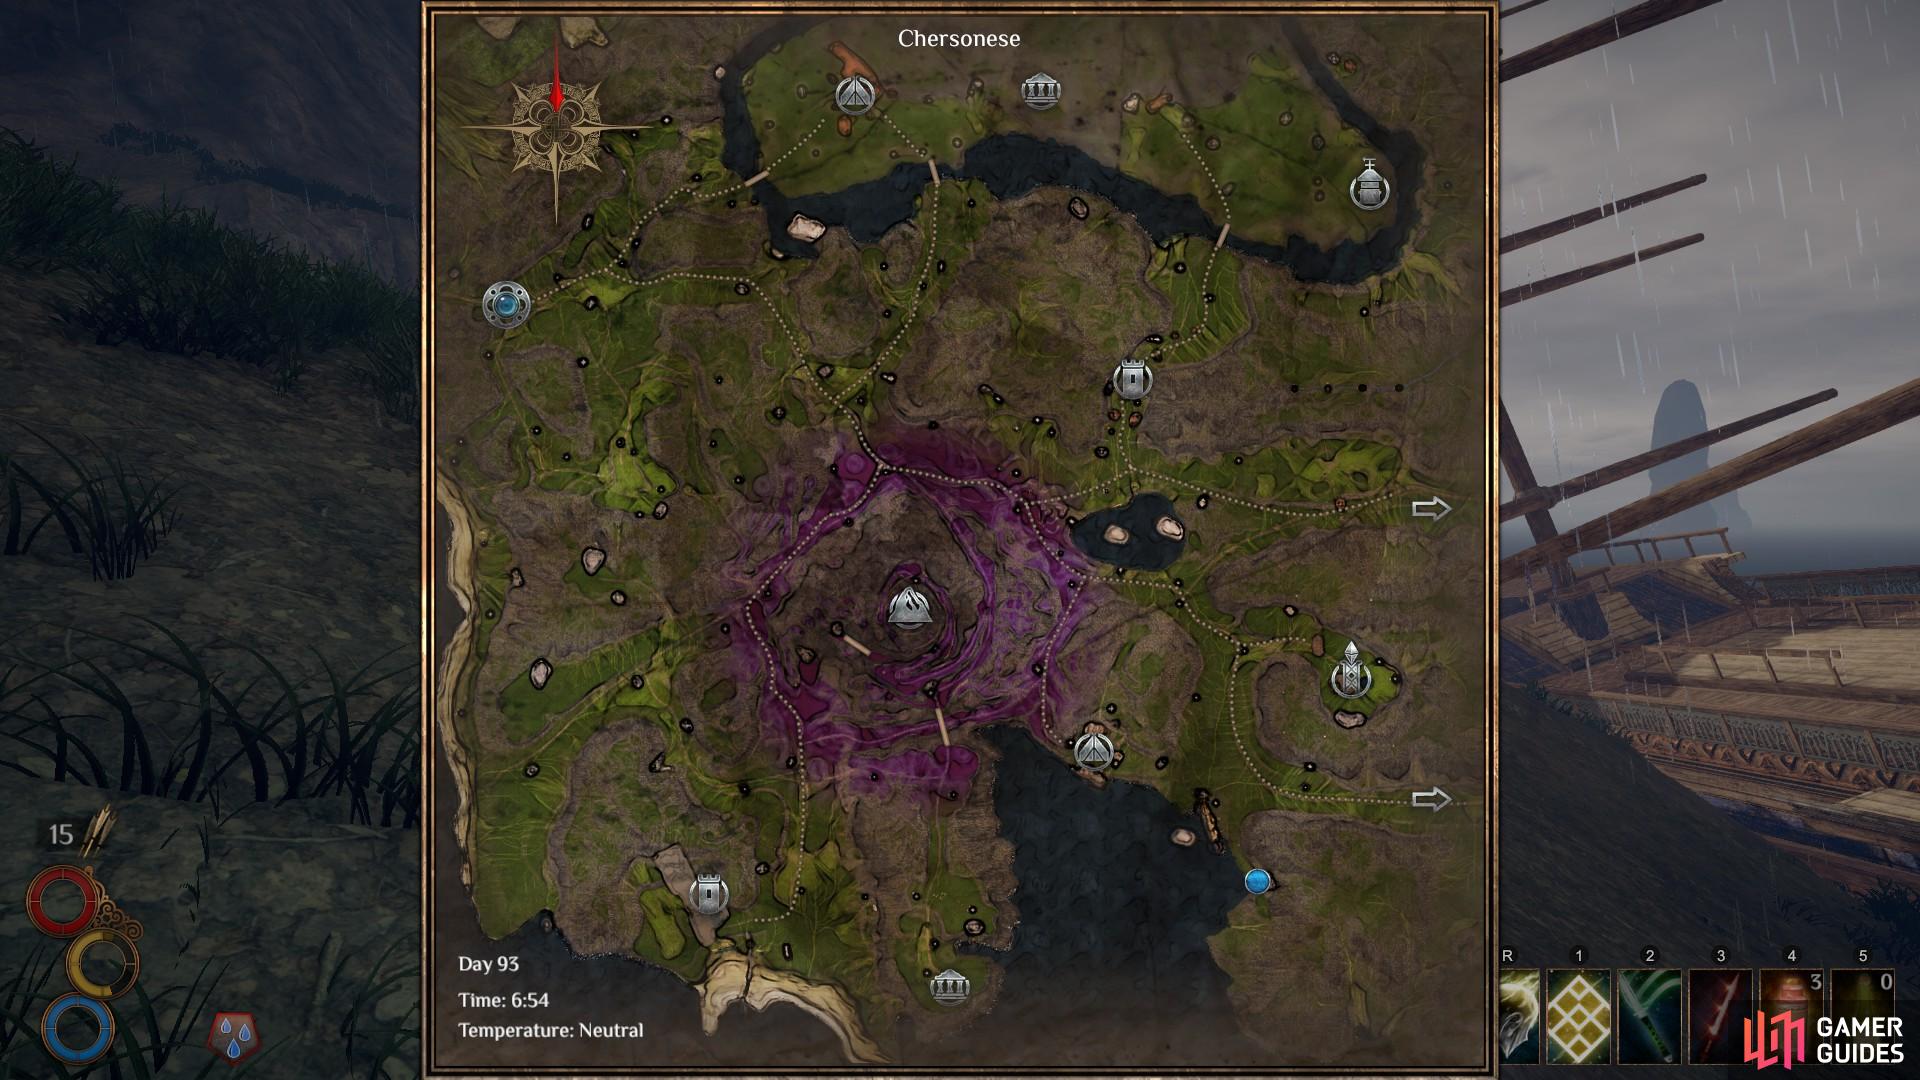 The location of the Voltaic Hatchery on the Chersonese map, marked here by a blue circle.